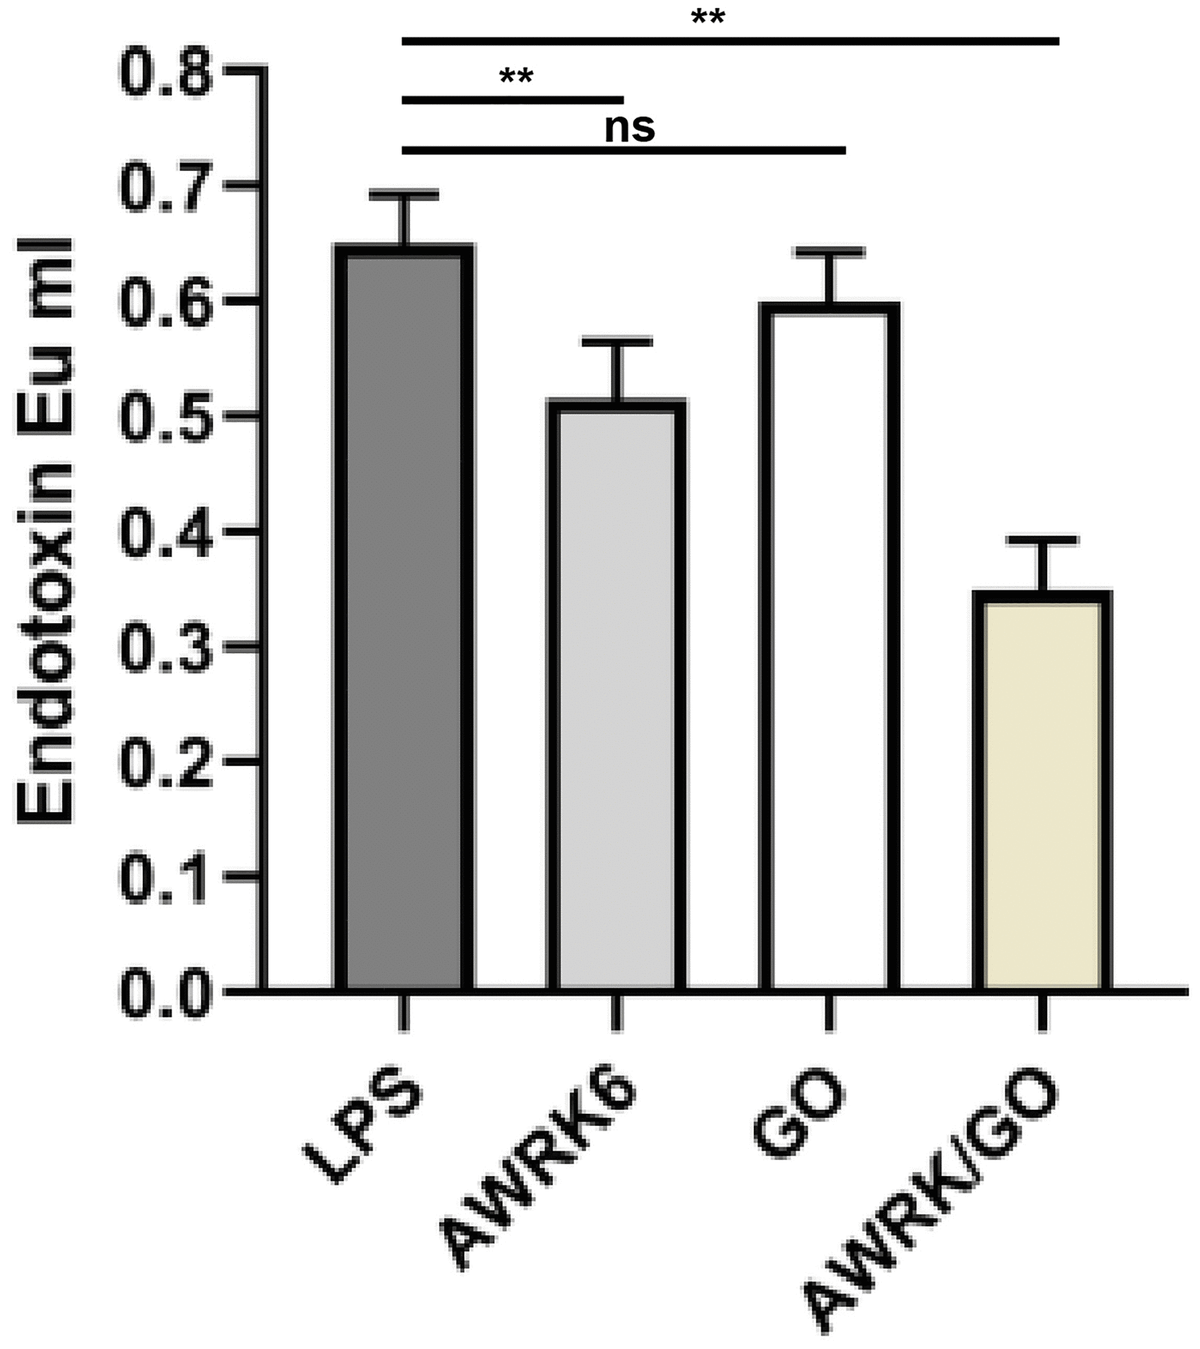 Inhibitory effect of AWRK6/GO on LPS activity in in vitro experiments.